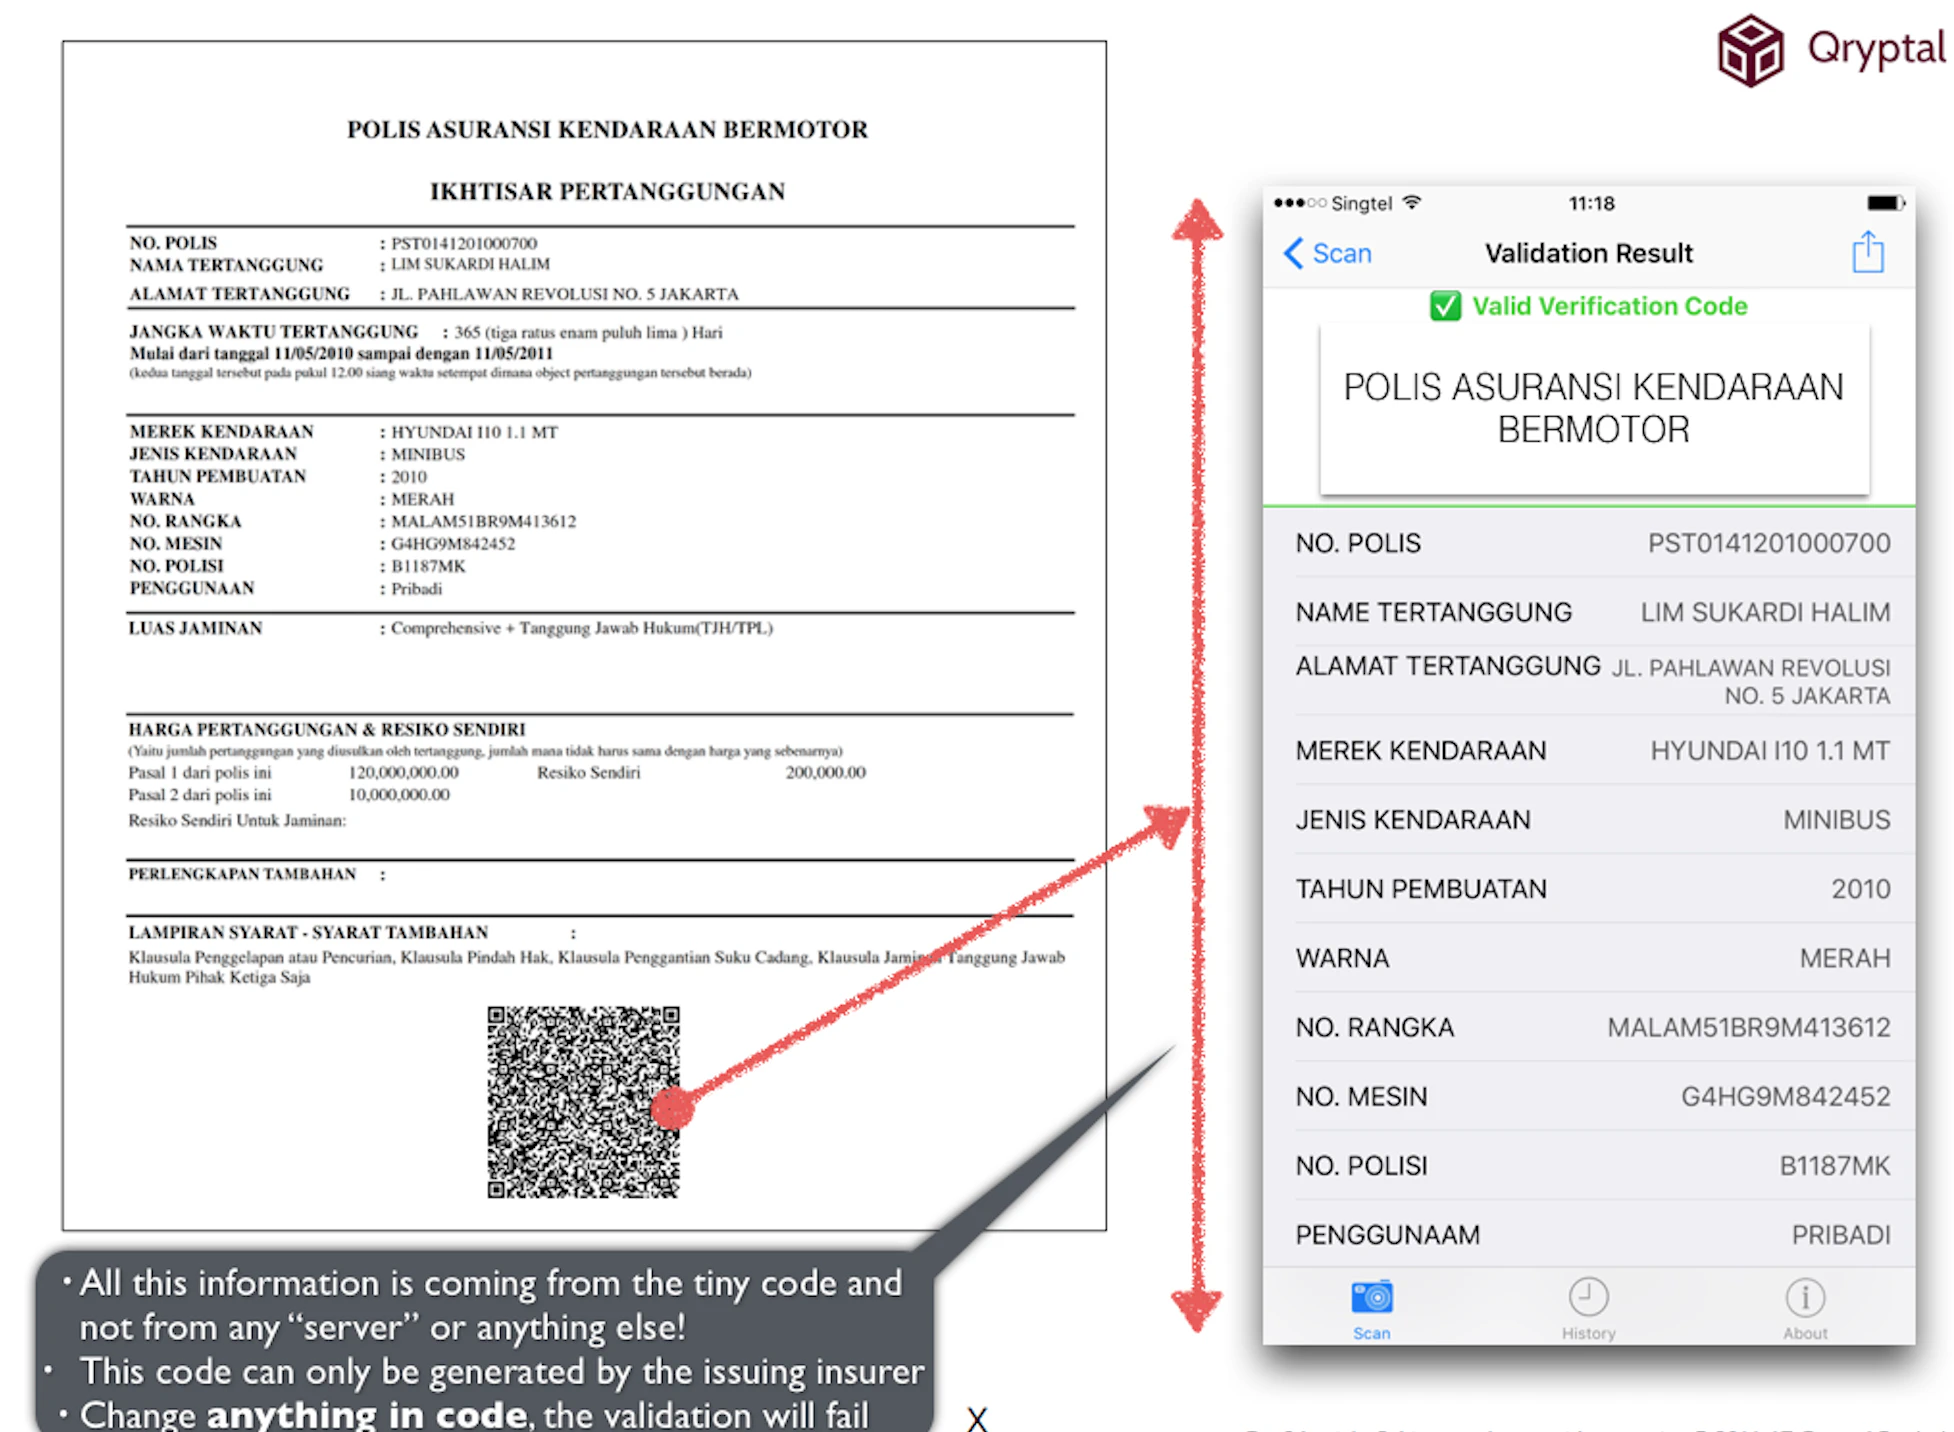 Sample motor insurance policy with secure QR code